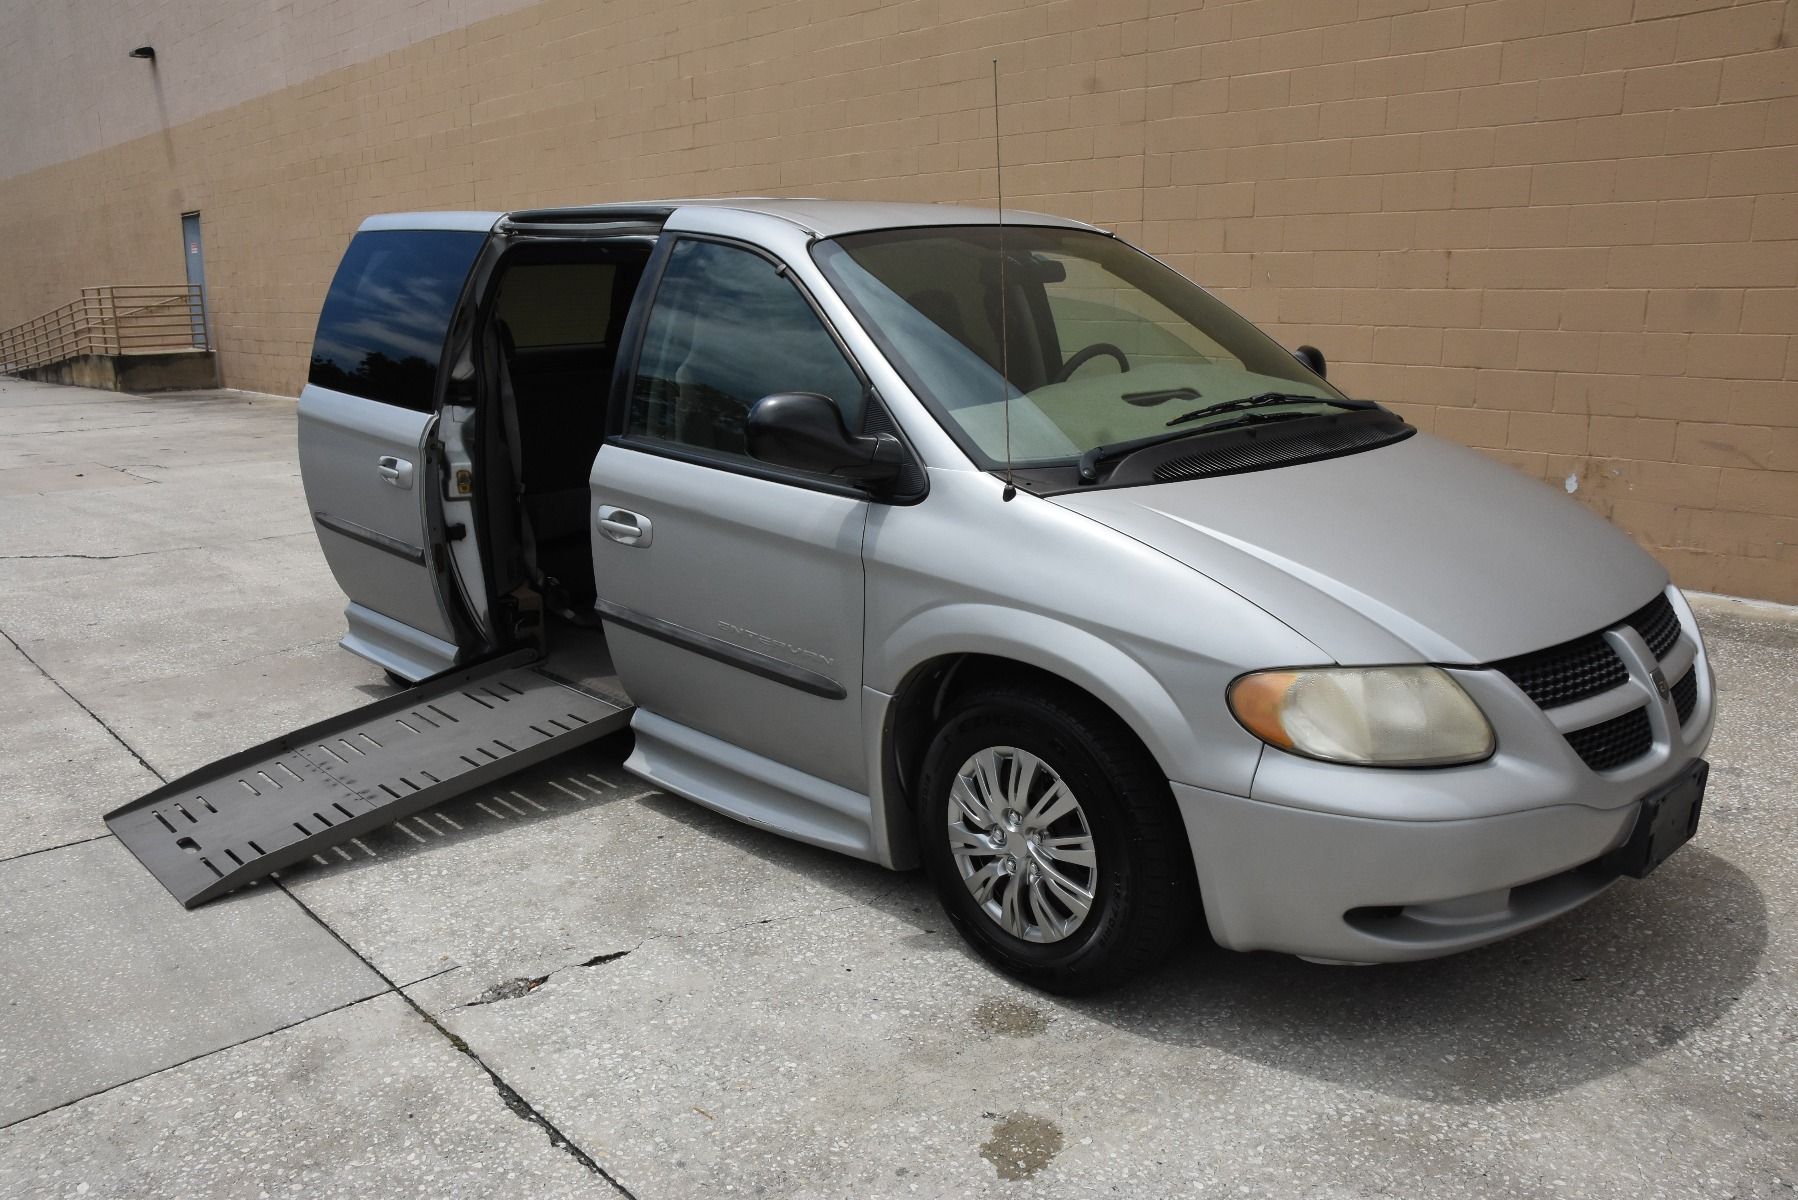 Passenger side of a silver 2003 Dodge Grand Caravan Wheelchair Van, with ramp deployed, as seen from front angle